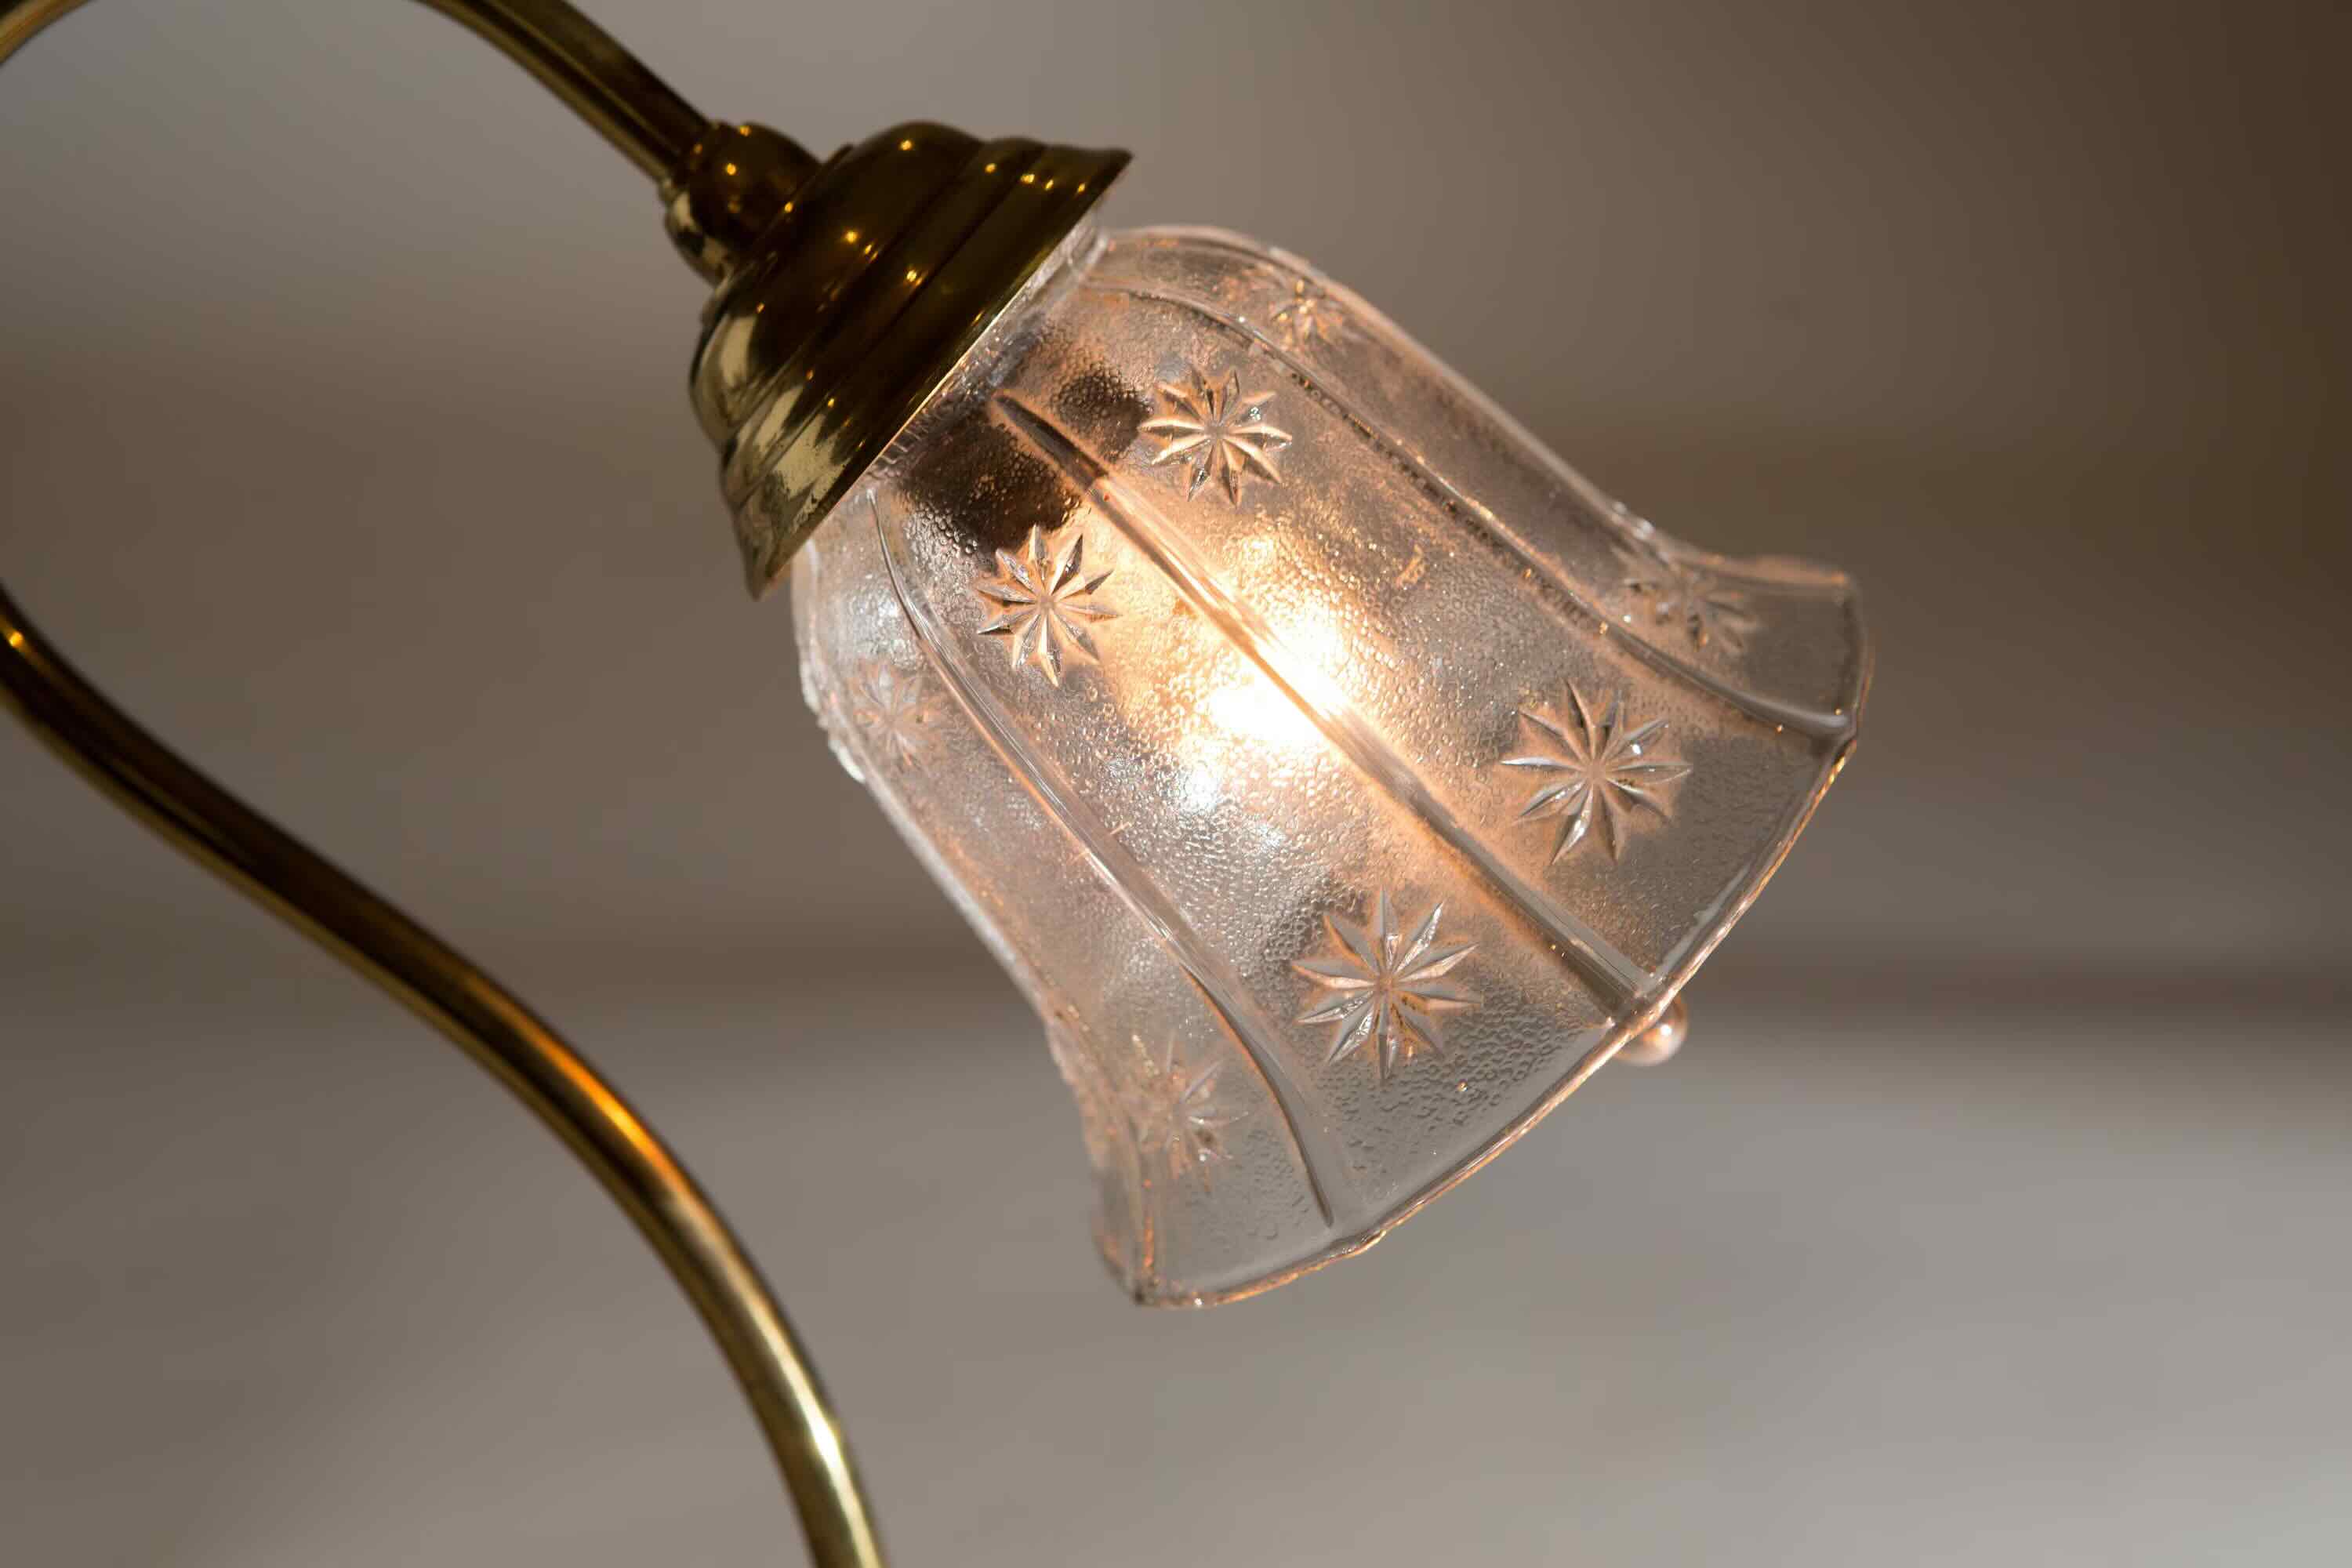 How To Tell If A Lamp Is Vintage